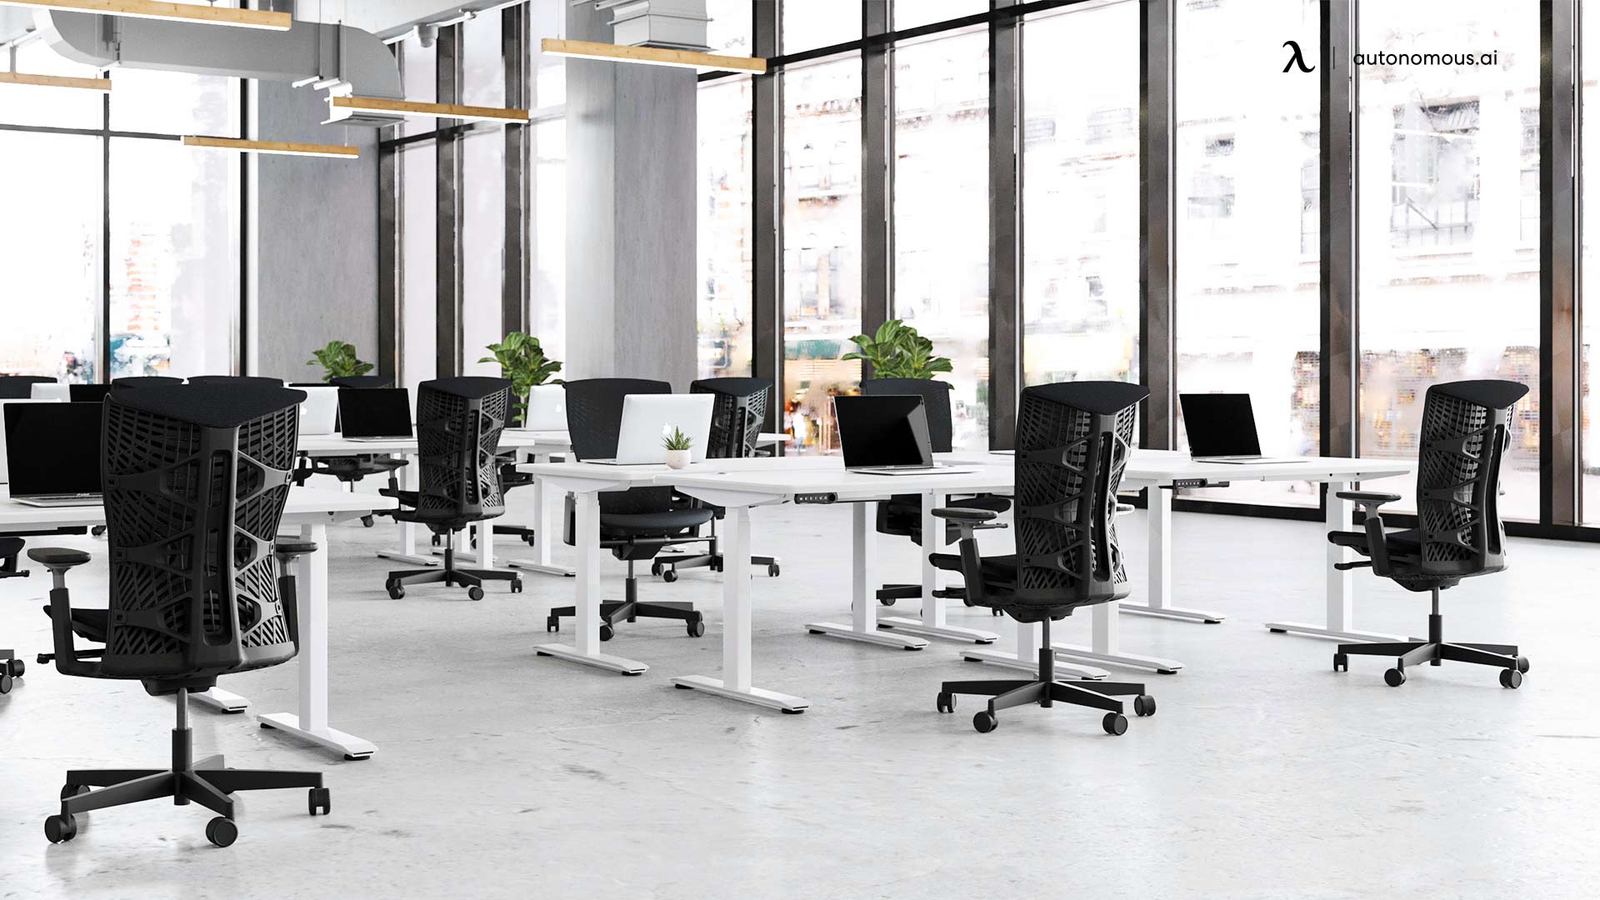 Wholesale Office Furniture: Discount Office Desk, Chair and More?